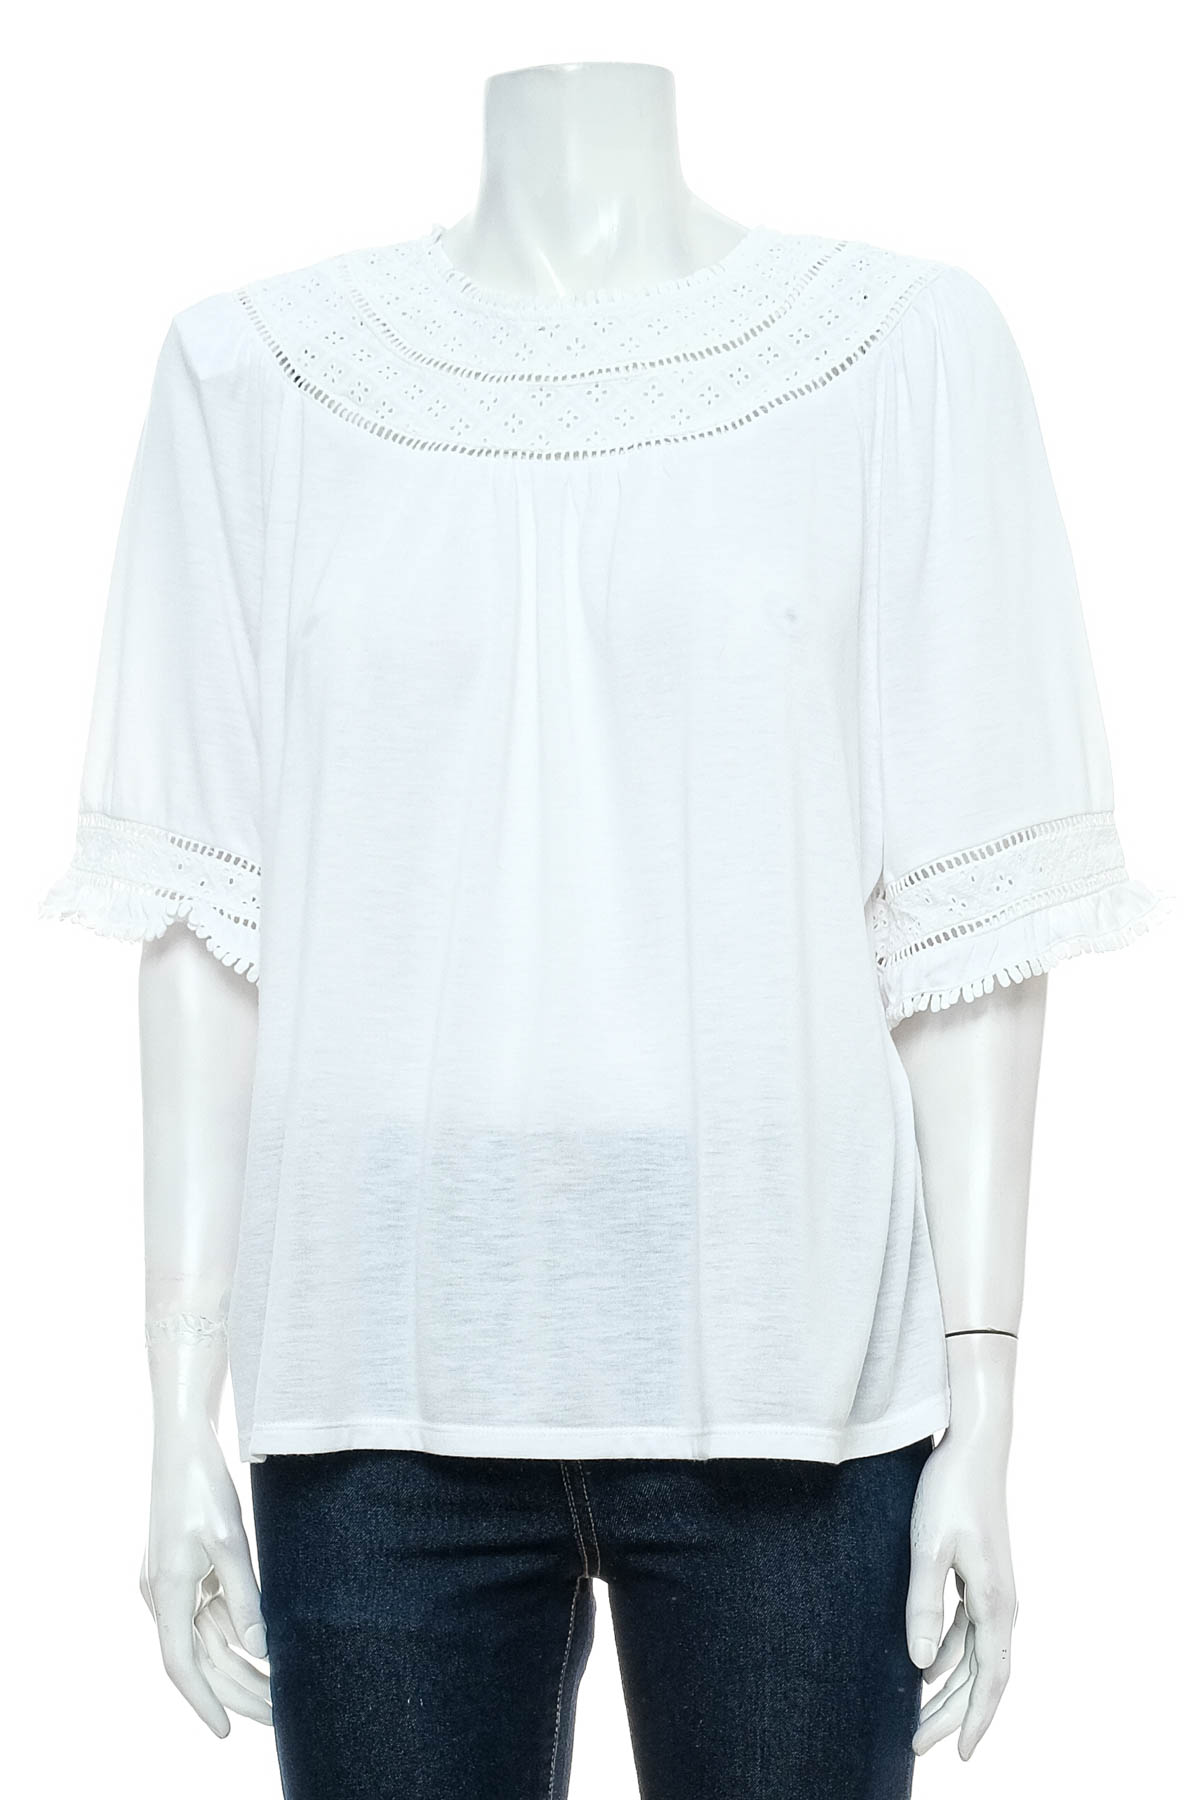 Women's t-shirt - M&S COLLECTION - 0